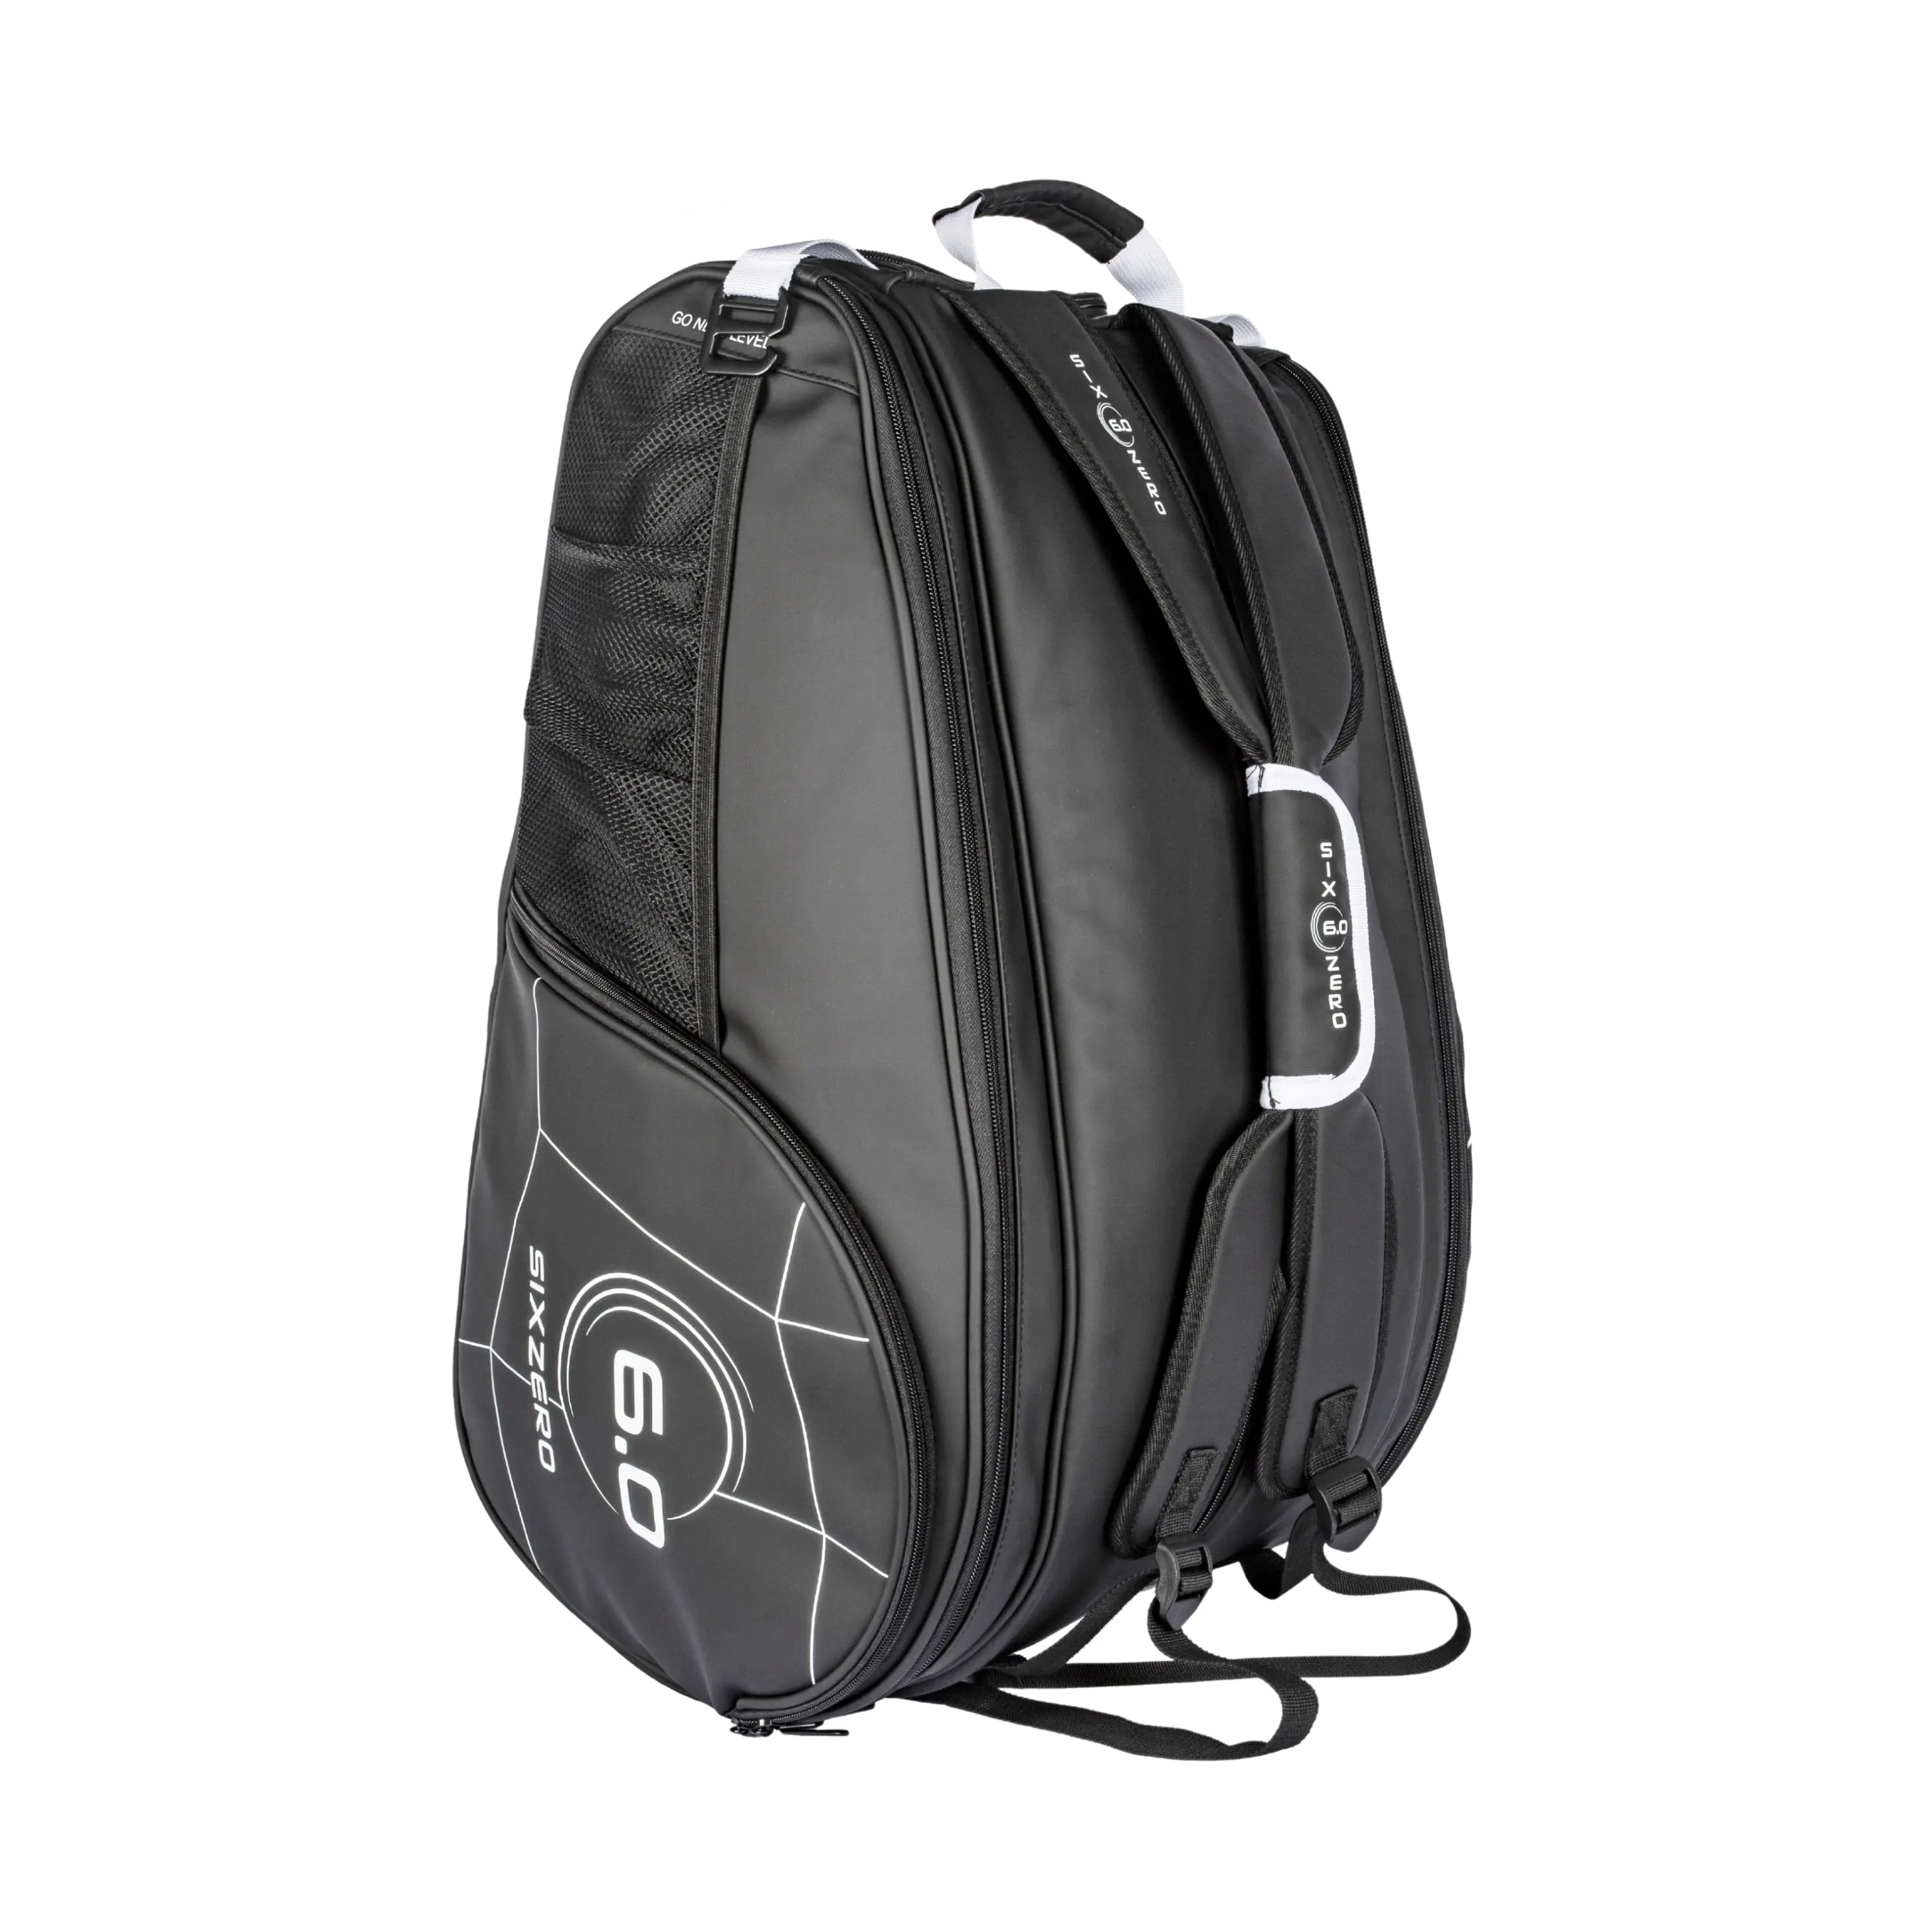 Alfa Player Tour Bag With Trolley Manufacturer & Supplier In India